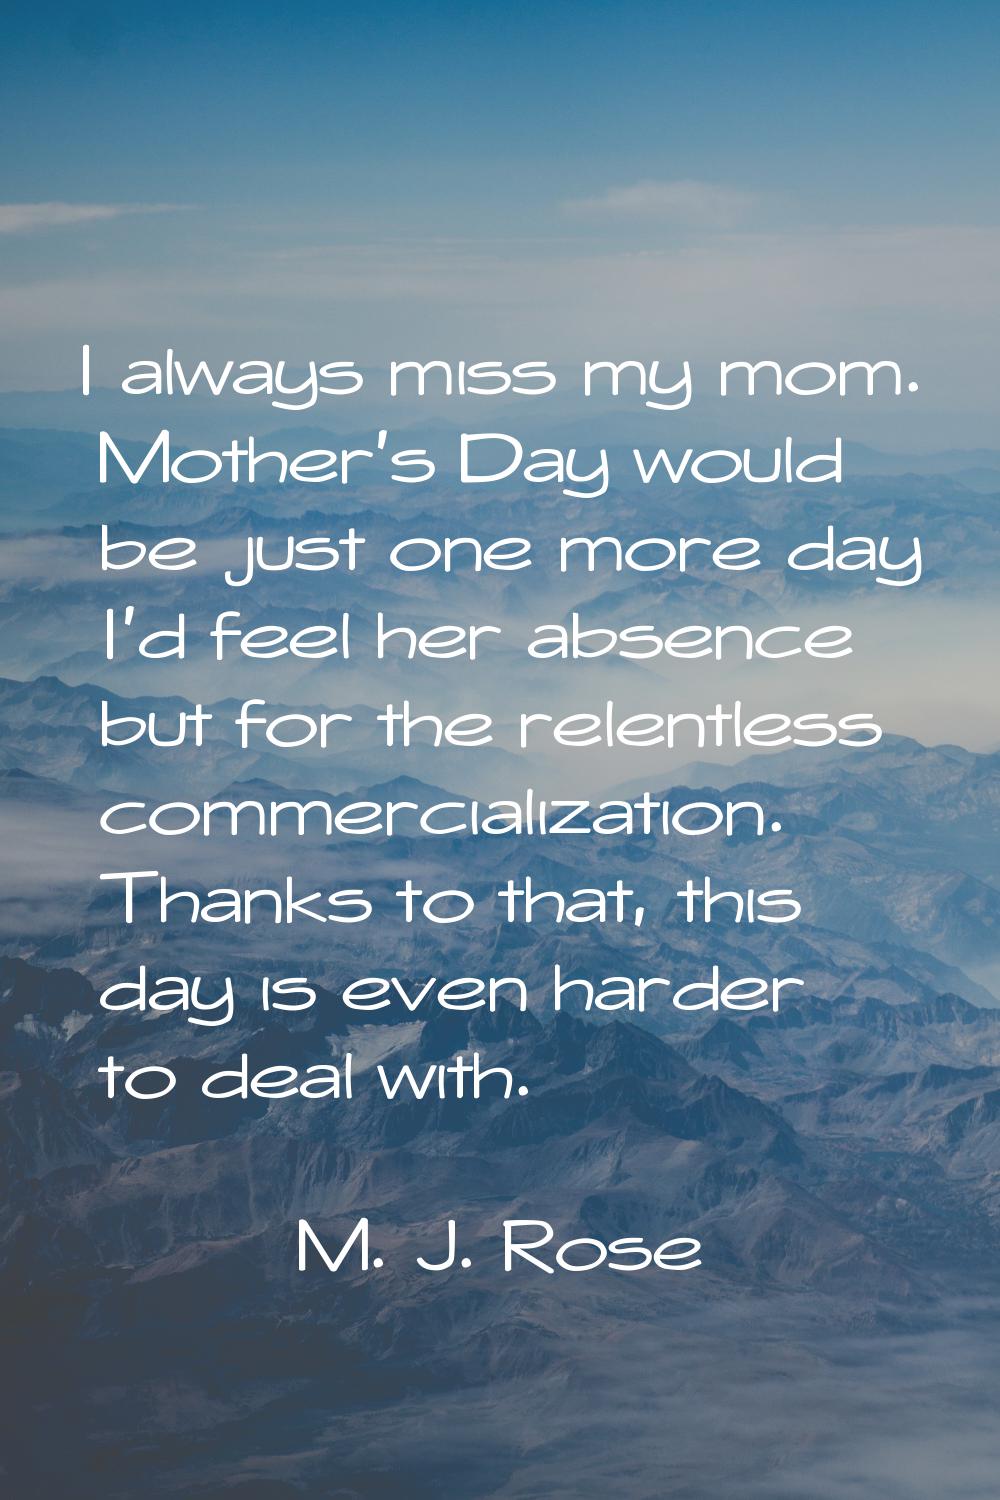 I always miss my mom. Mother's Day would be just one more day I'd feel her absence but for the rele